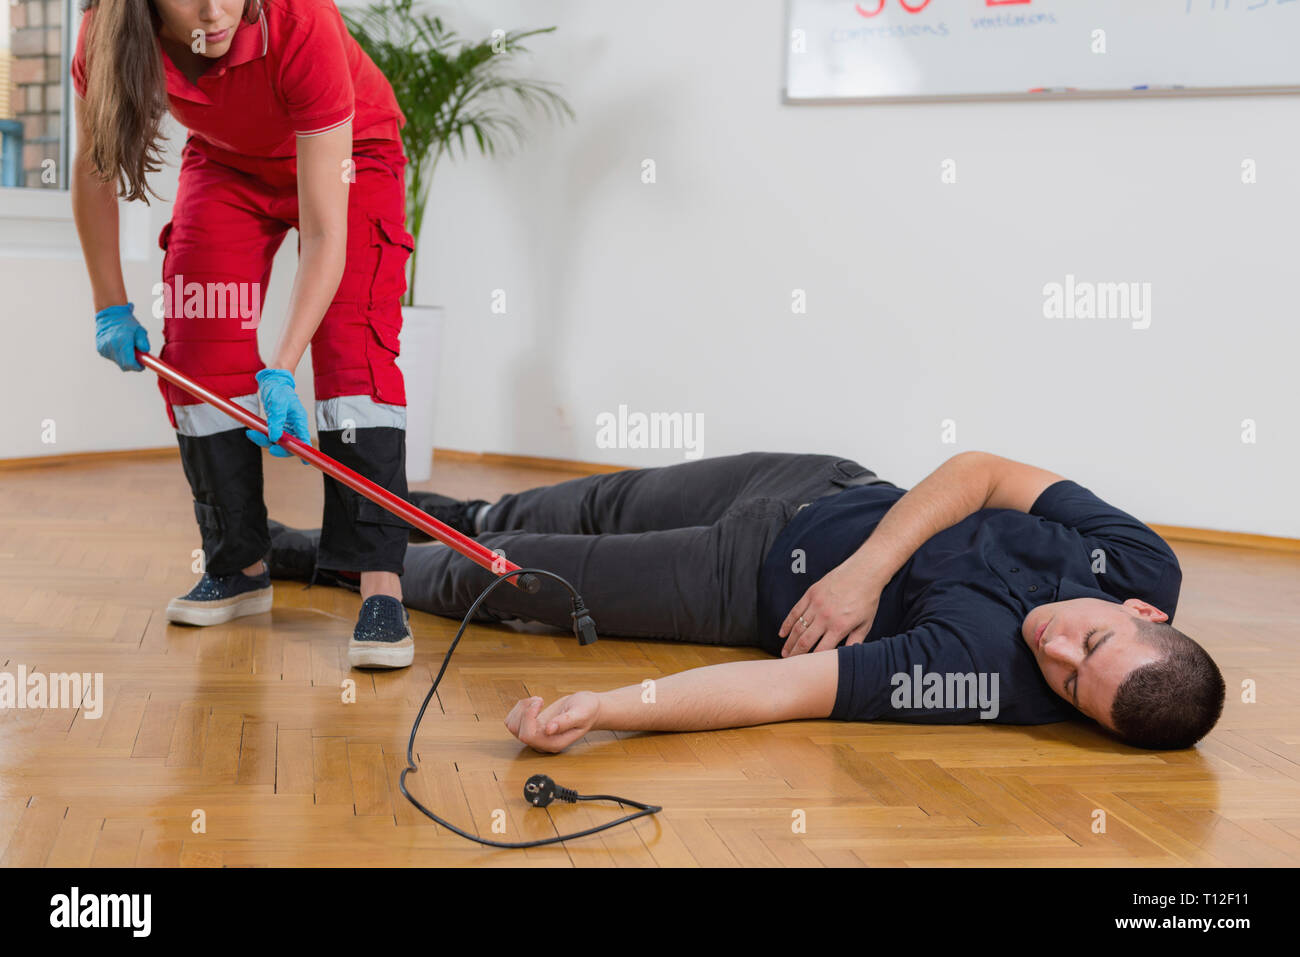 First Aid Training. Electric shock. Fist aid course. Stock Photo